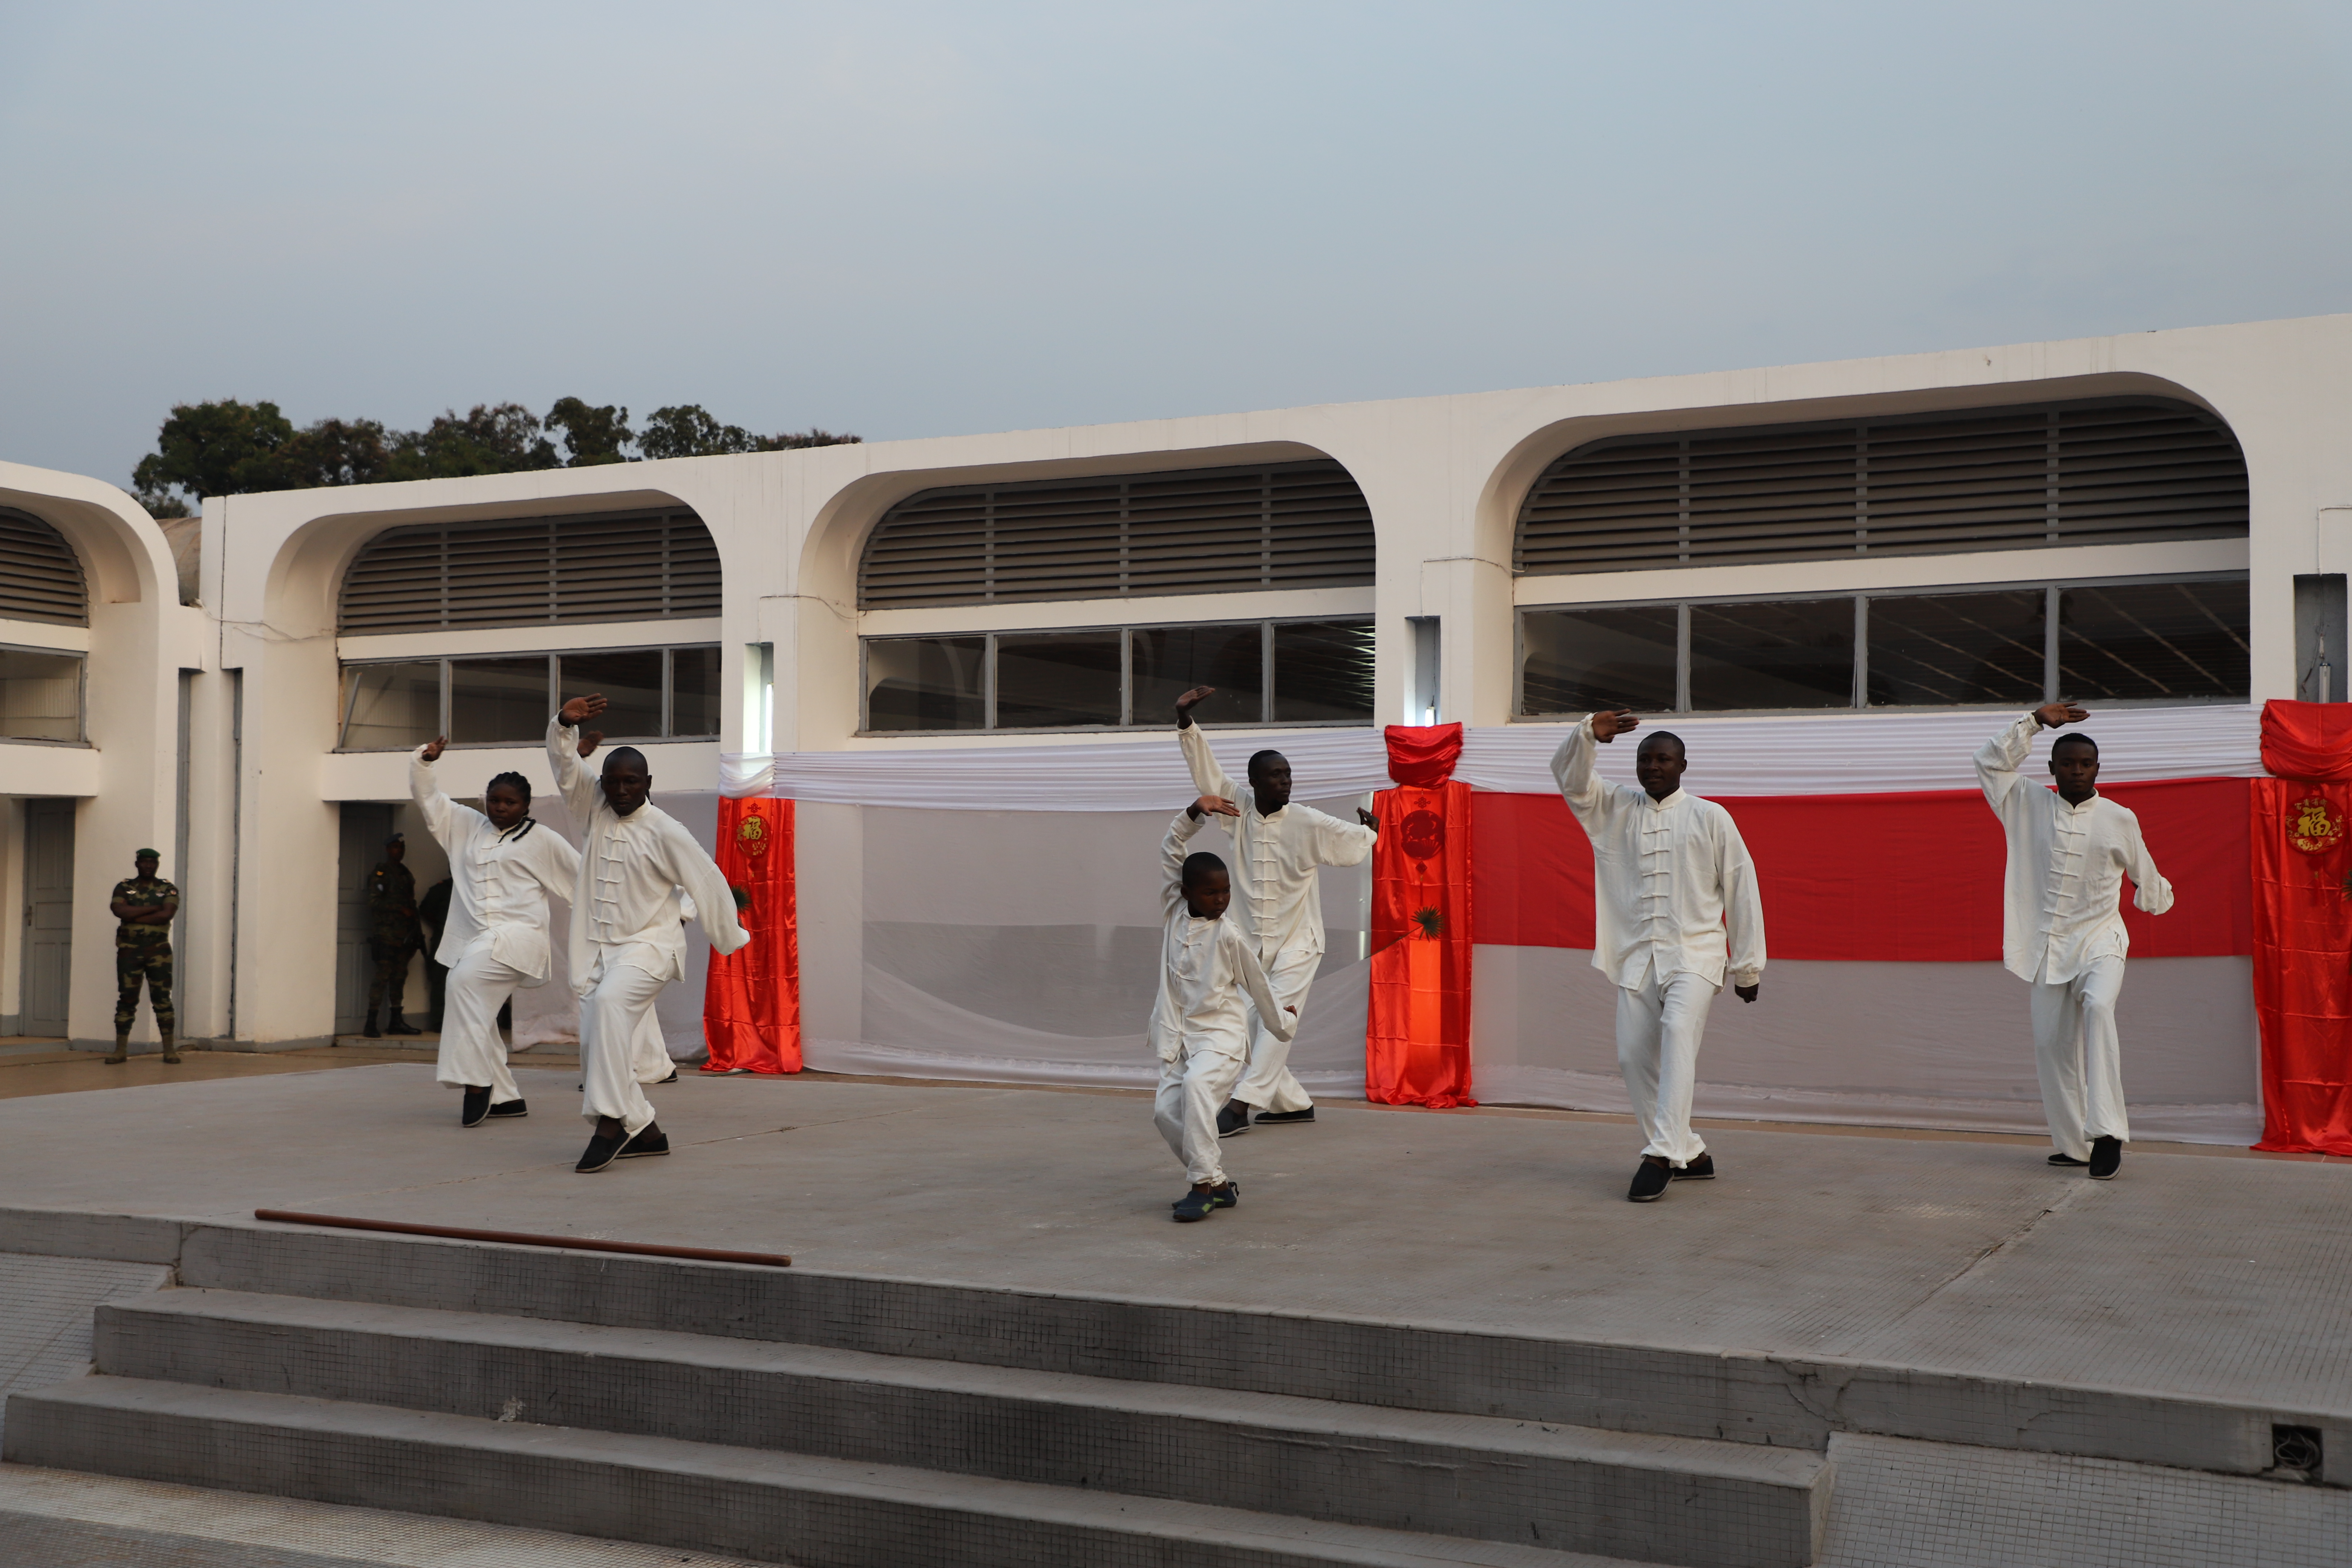 Students perform Tai Chi, a form of Chinese martial arts, in Bangui, capital of the Central African Republic, January 18, 2023. /Chinese Embassy in CAR